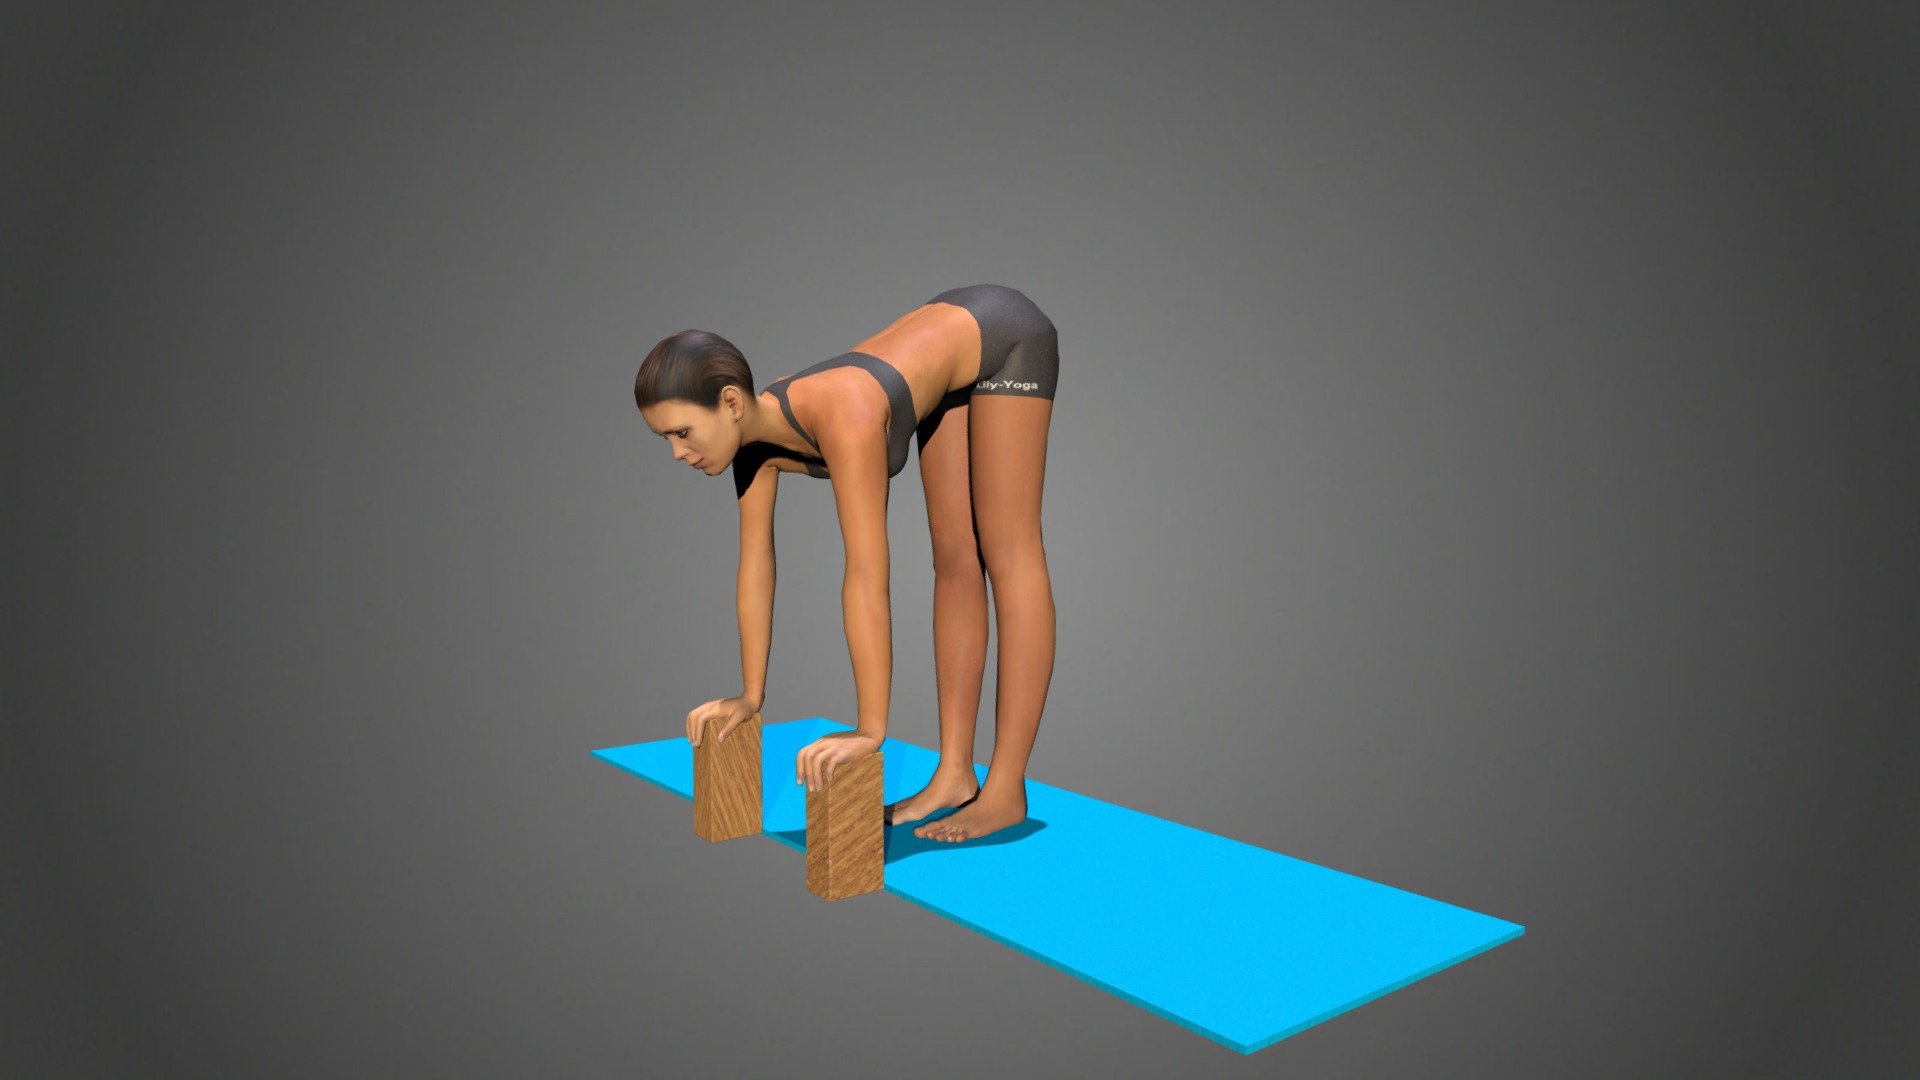 Yoga Block Pose To Relieve Back Pain, Anxiety & Improve Posture - Yoga To  Feel Your Best - YouTube